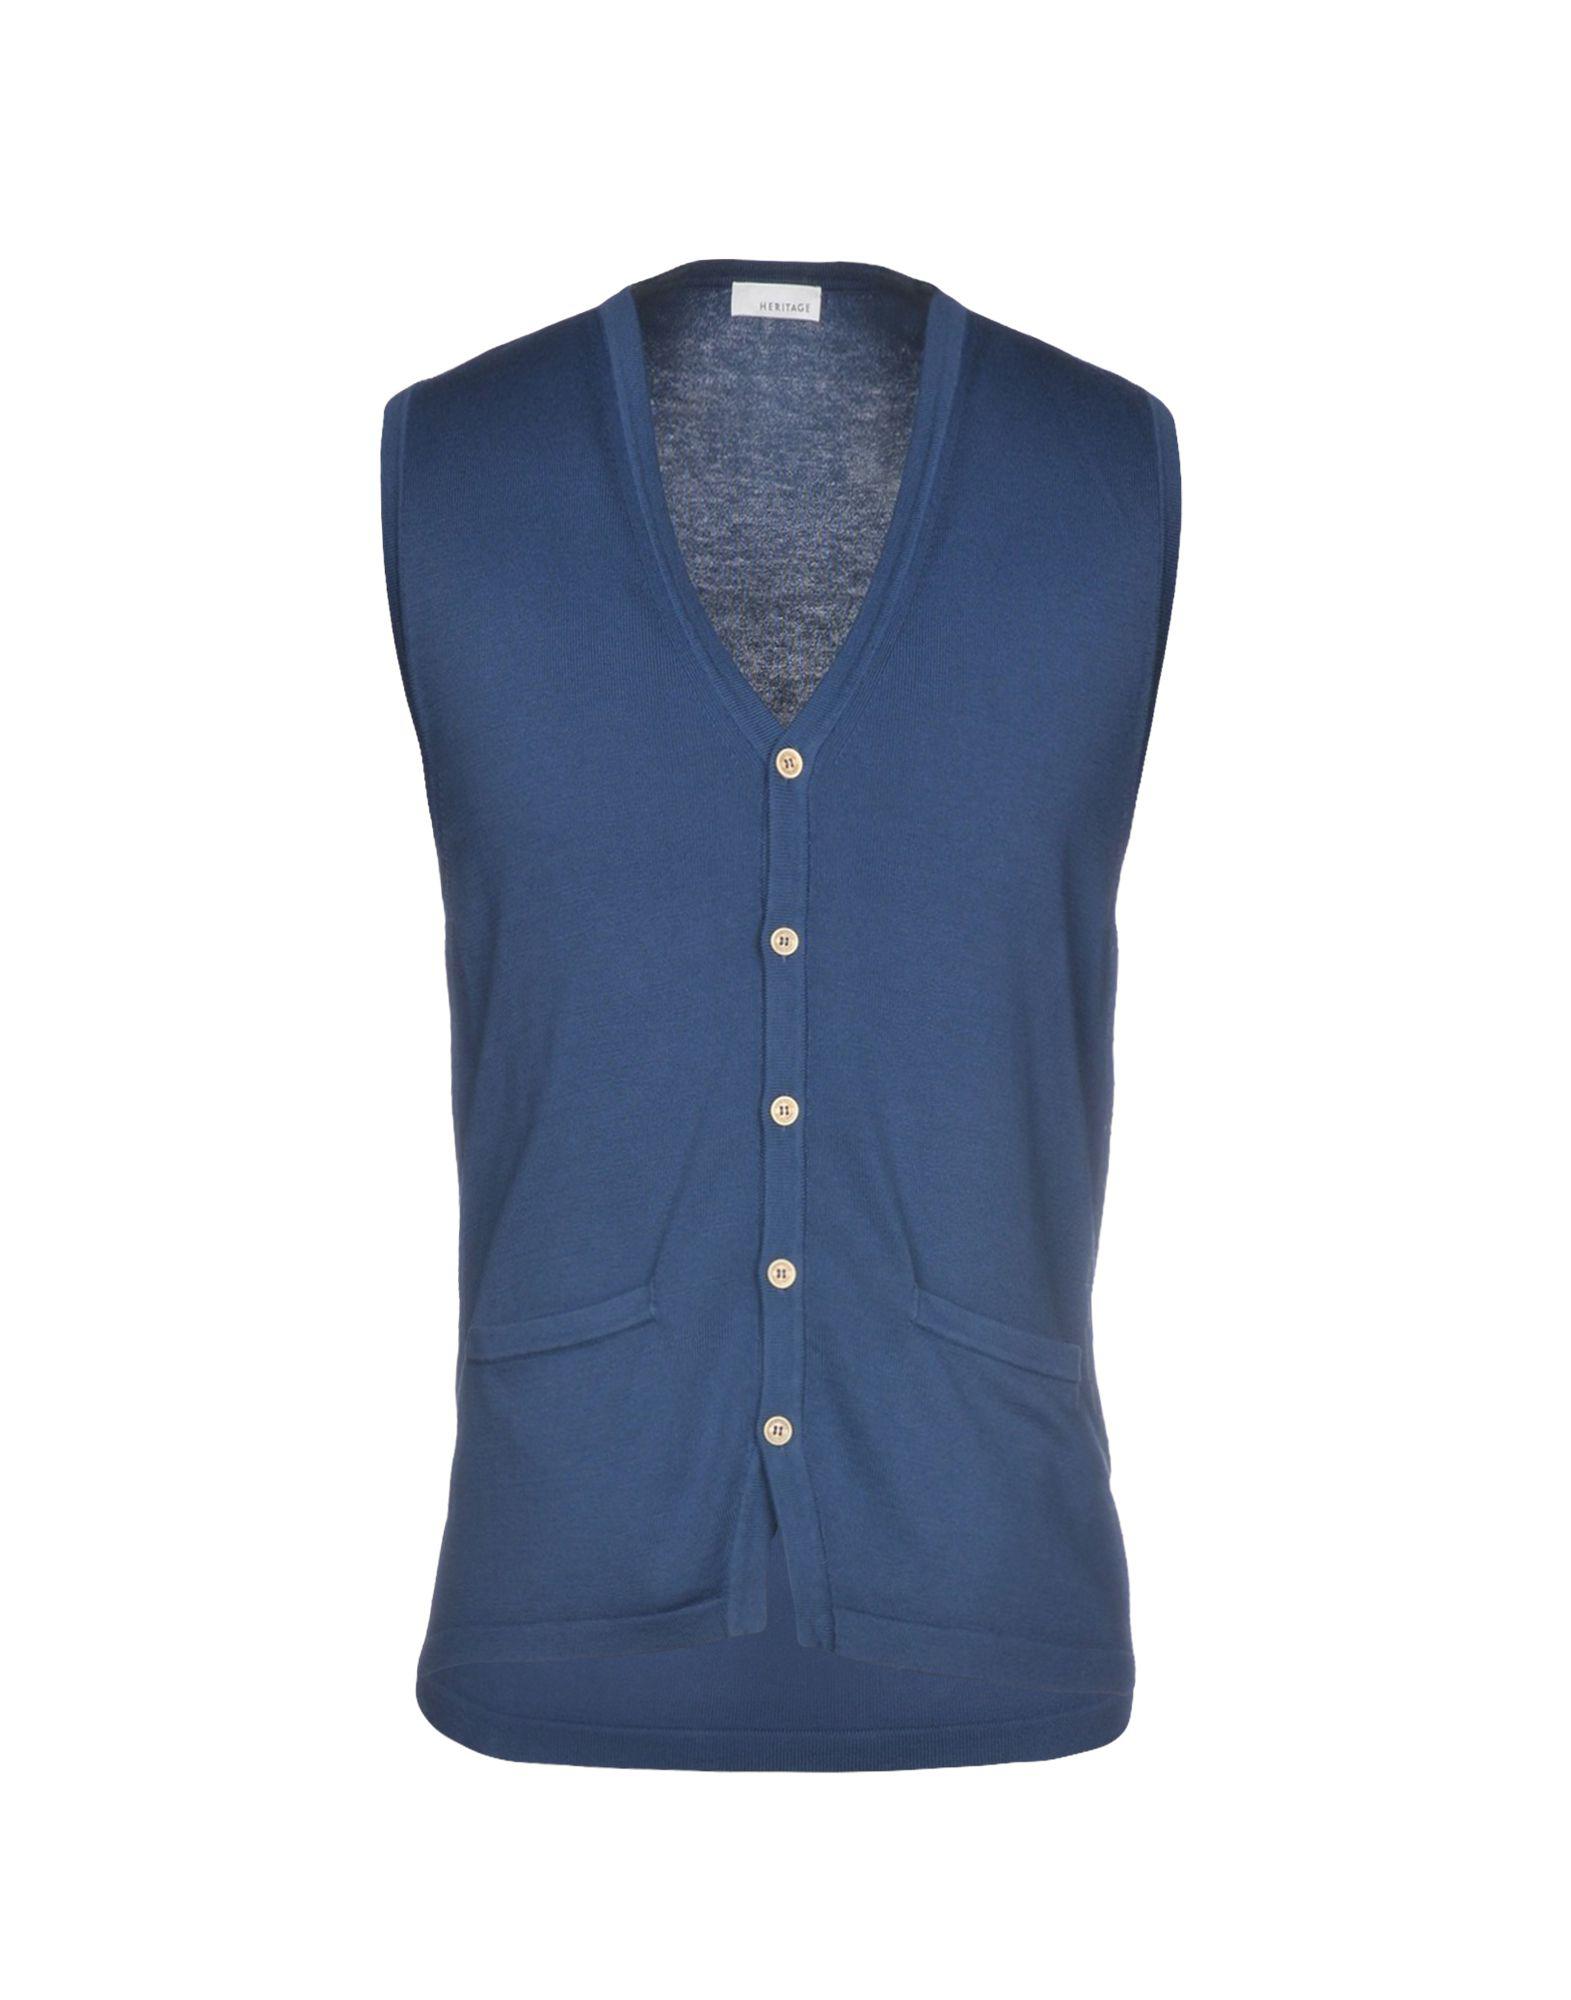 Heritage Cotton Cardigan in Blue for Men - Lyst